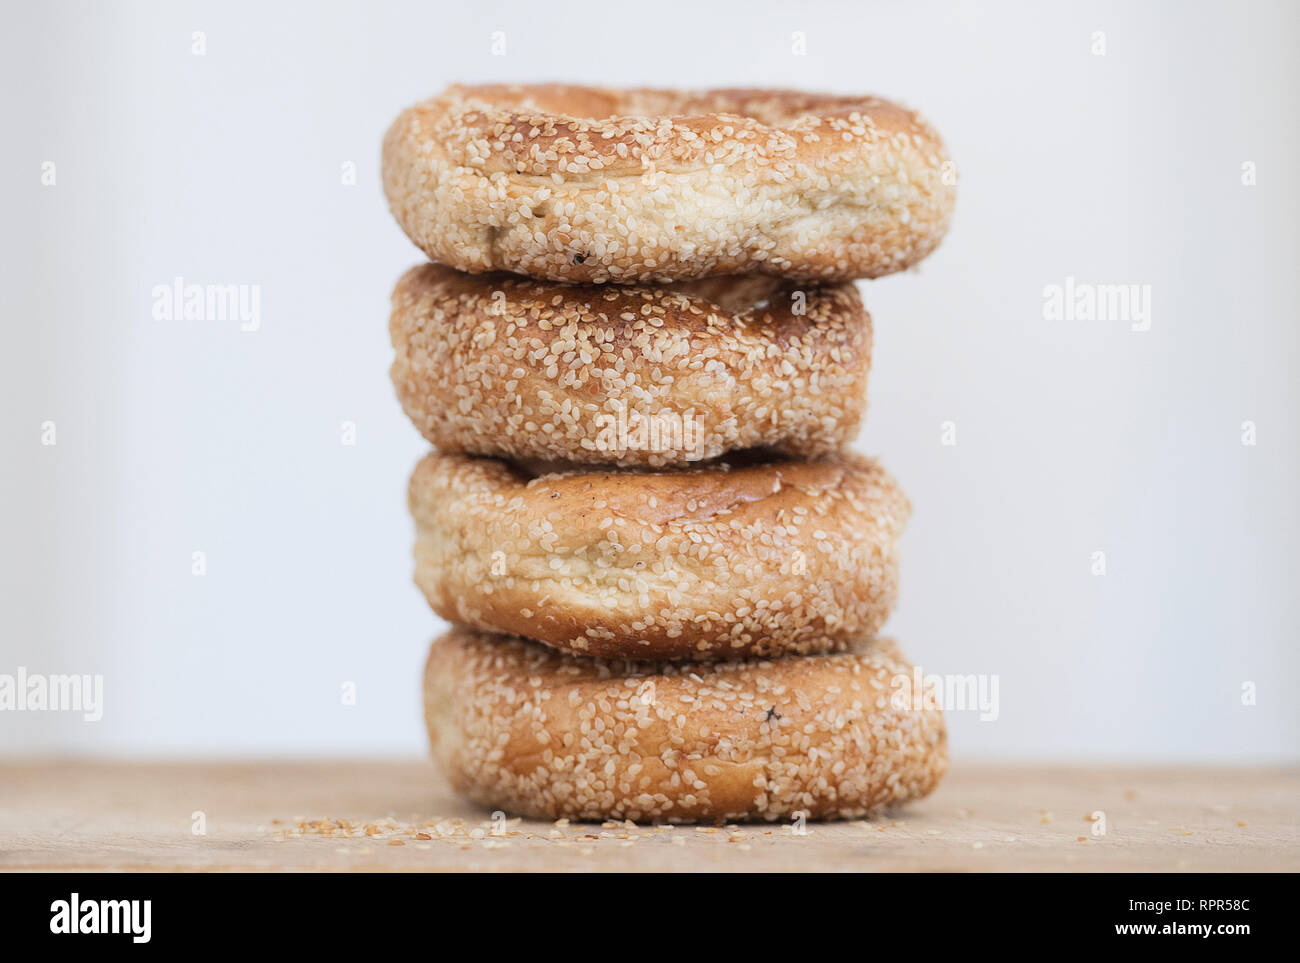 Montreal sesame seed bagels are shown Stock Photo